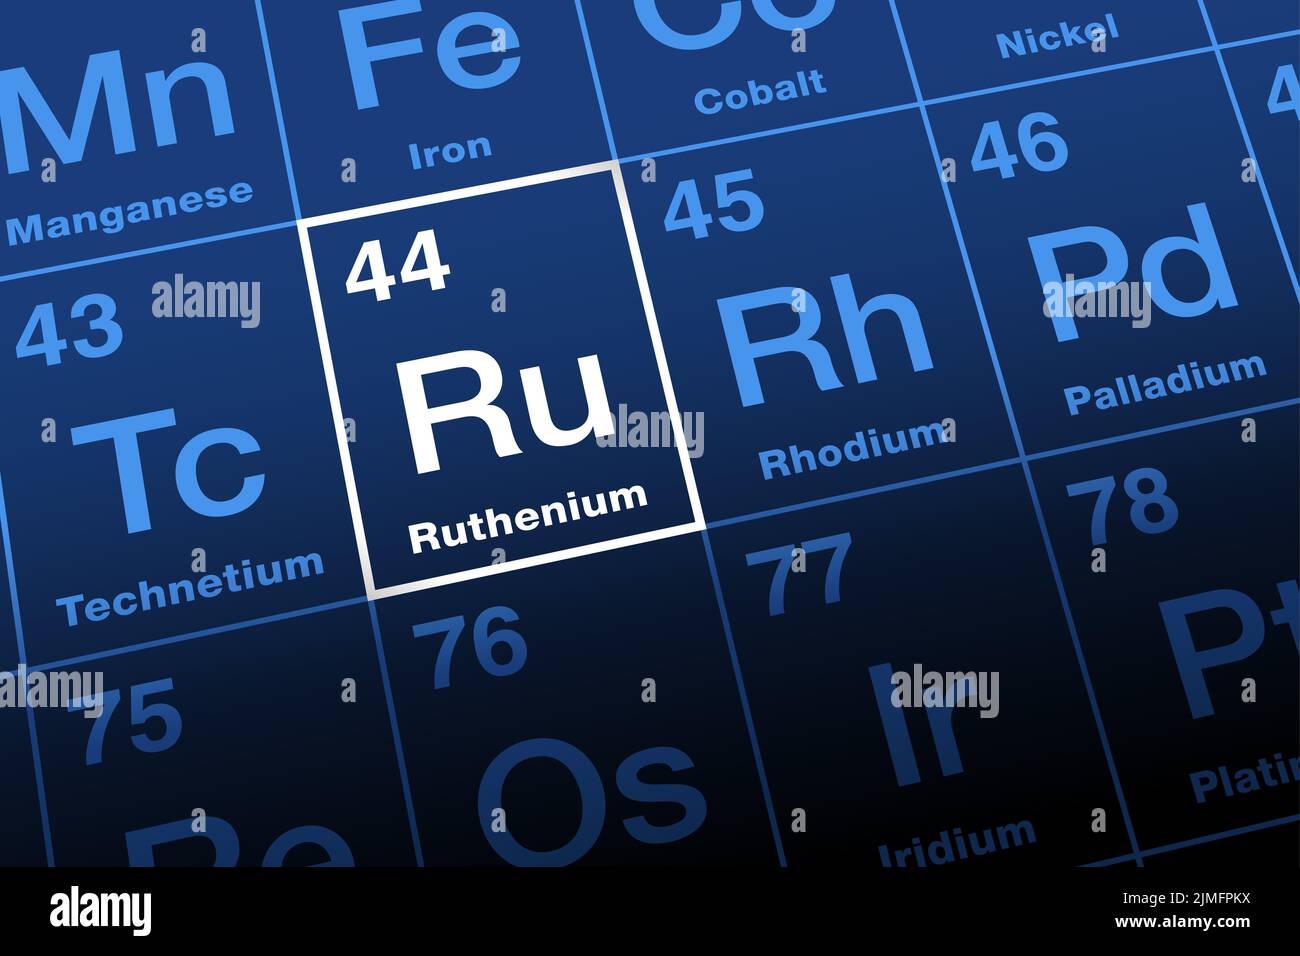 Ruthenium on periodic table. Transition metal named after Ruthenia, Latin Russia. Element symbol Ru, atomic number 44. Member of platinum group. Stock Photo